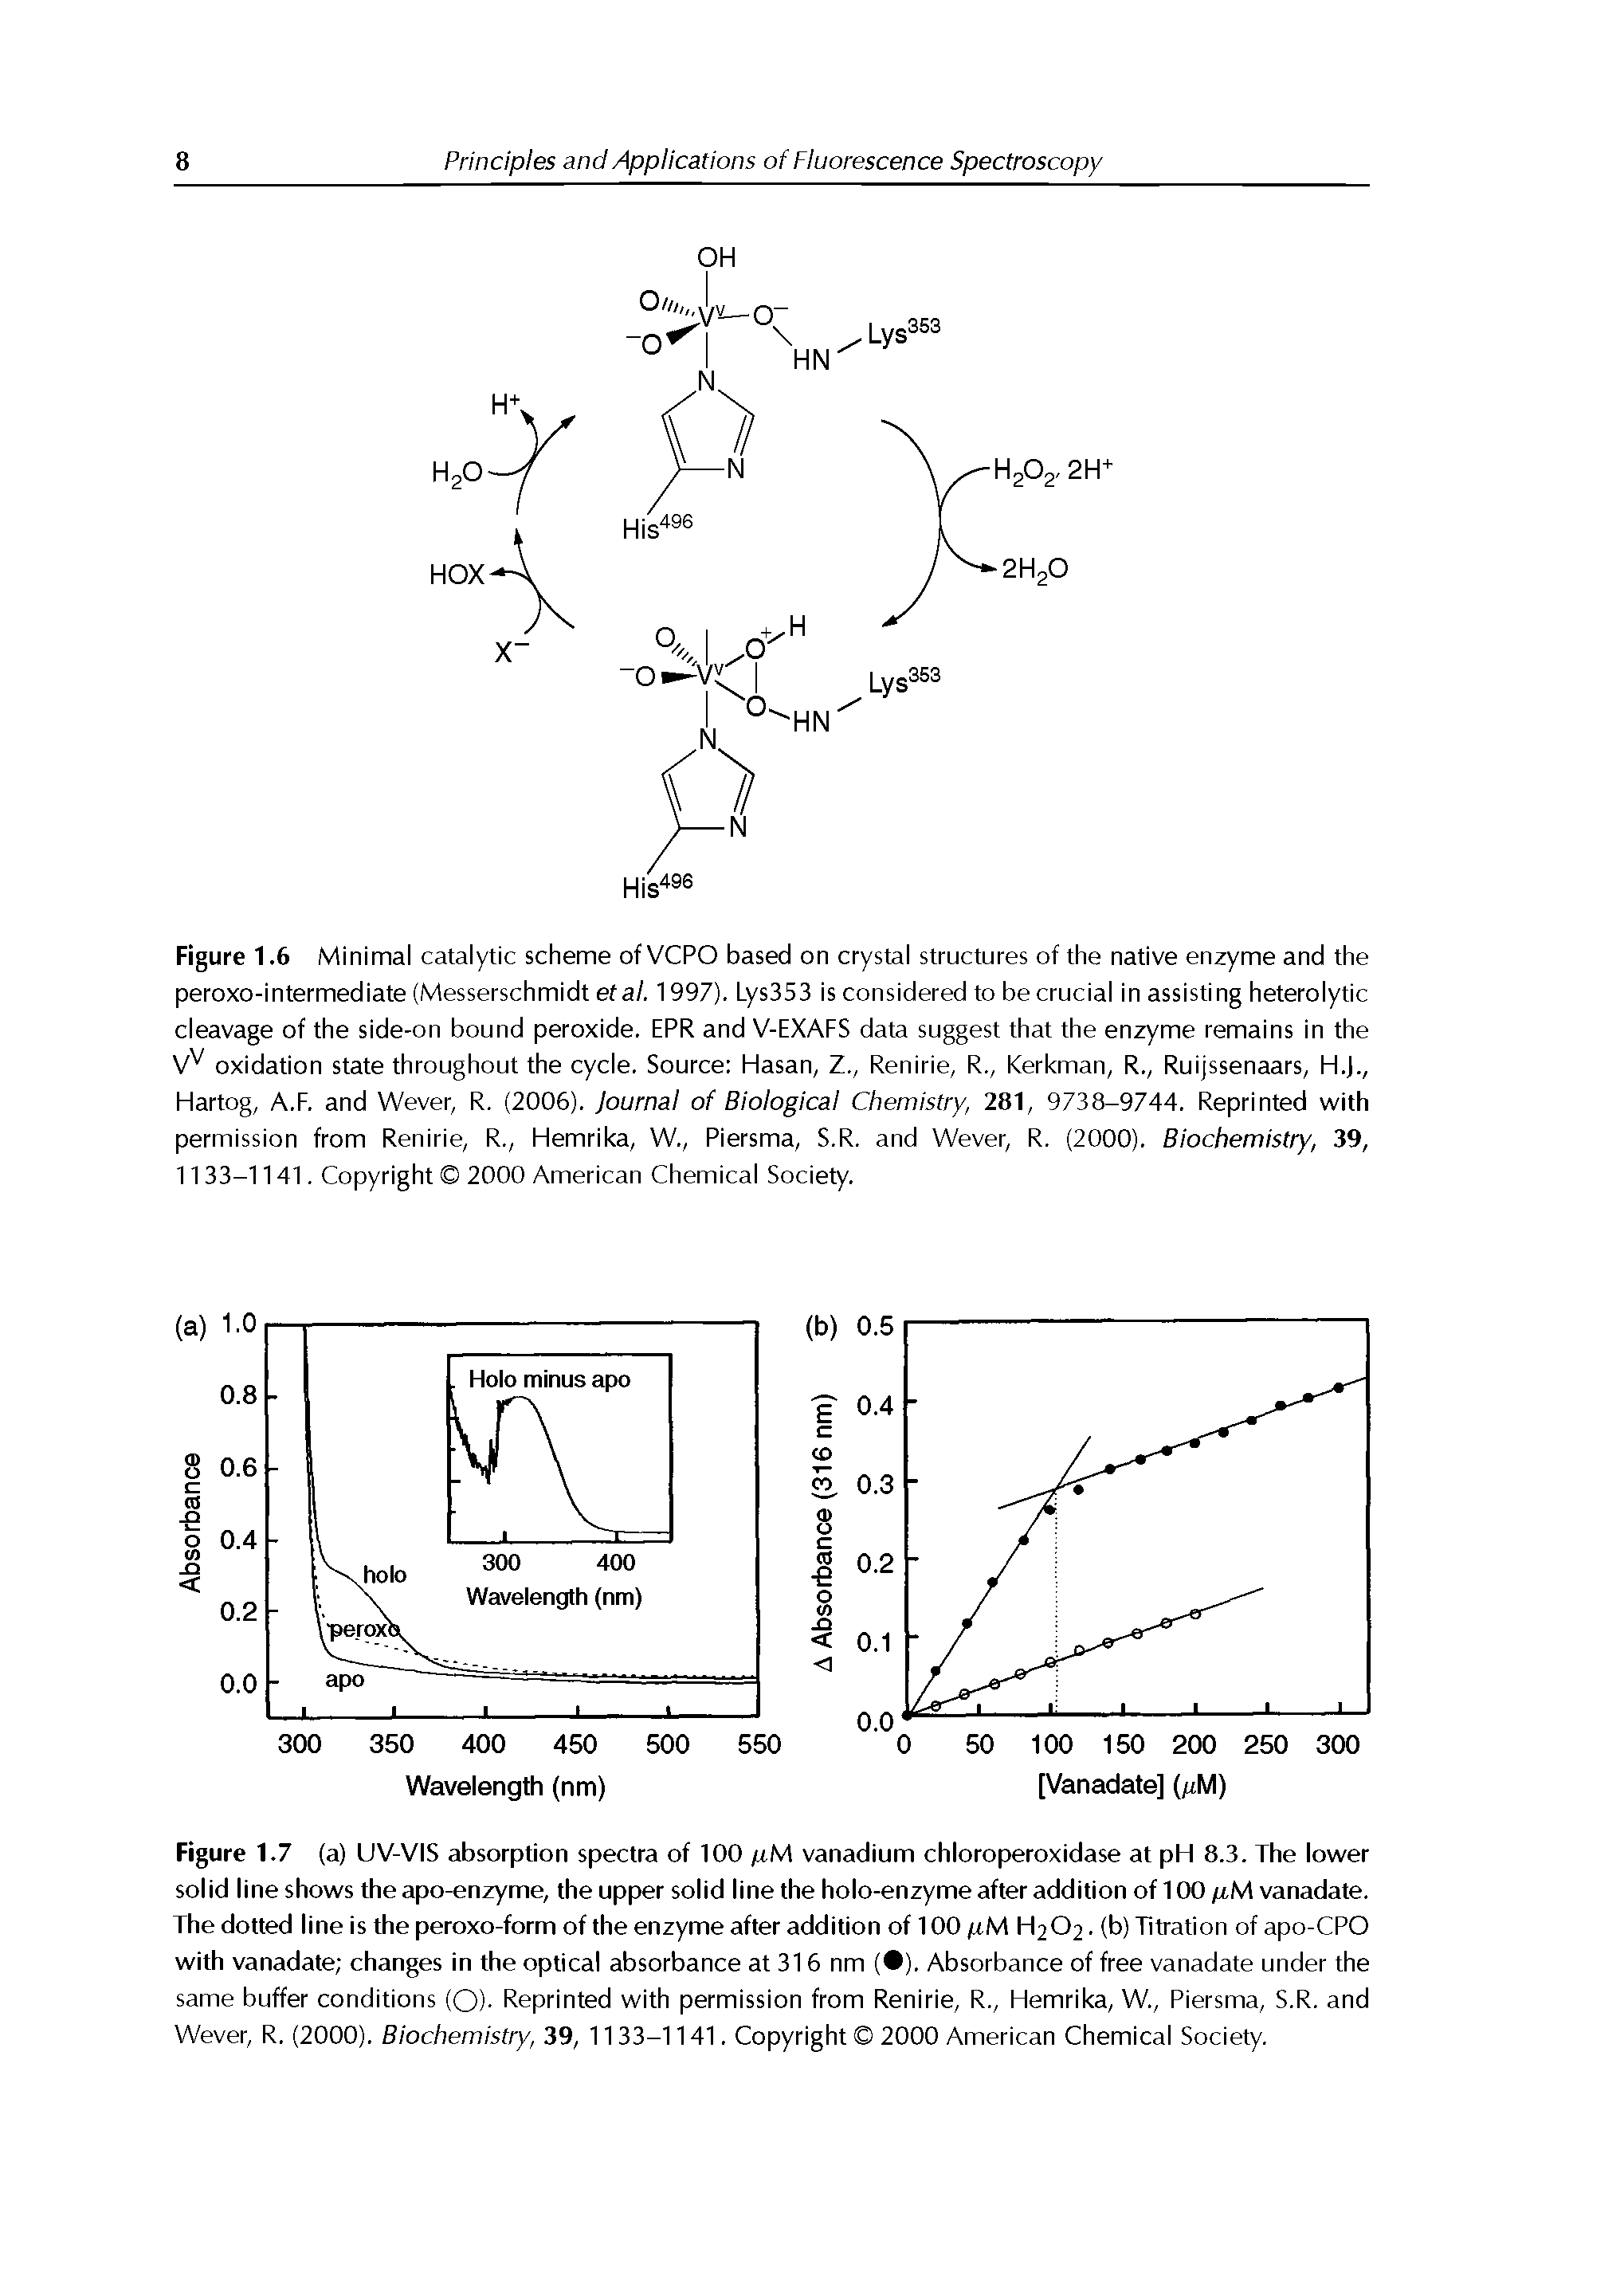 Figure 1.6 Minimal catalytic scheme of VCPO based on crystal structures of the native enzyme and the peroxo-intermediate (Messerschmidt ef a/. 1997). Lys353 is considered to be crucial in assisting heterolytic cleavage of the side-on bound peroxide. EPR and V-EXAFS data suggest that the enzyme remains in the oxidation state throughout the cycle. Source Hasan, Z., Renirie, R., Kerkman, R., Ruijssenaars, H.J., Hartog, A.F. and Wever, R. (2006). Journal of Biological Chemistry, 281, 9738-9744. Reprinted with permission from Renirie, R., Hemrika, W., Piersma, S.R. and Wever, R. (2000). Biochemistry, 39, 11 33-1141. Copyright 2000 American Chemical Society.